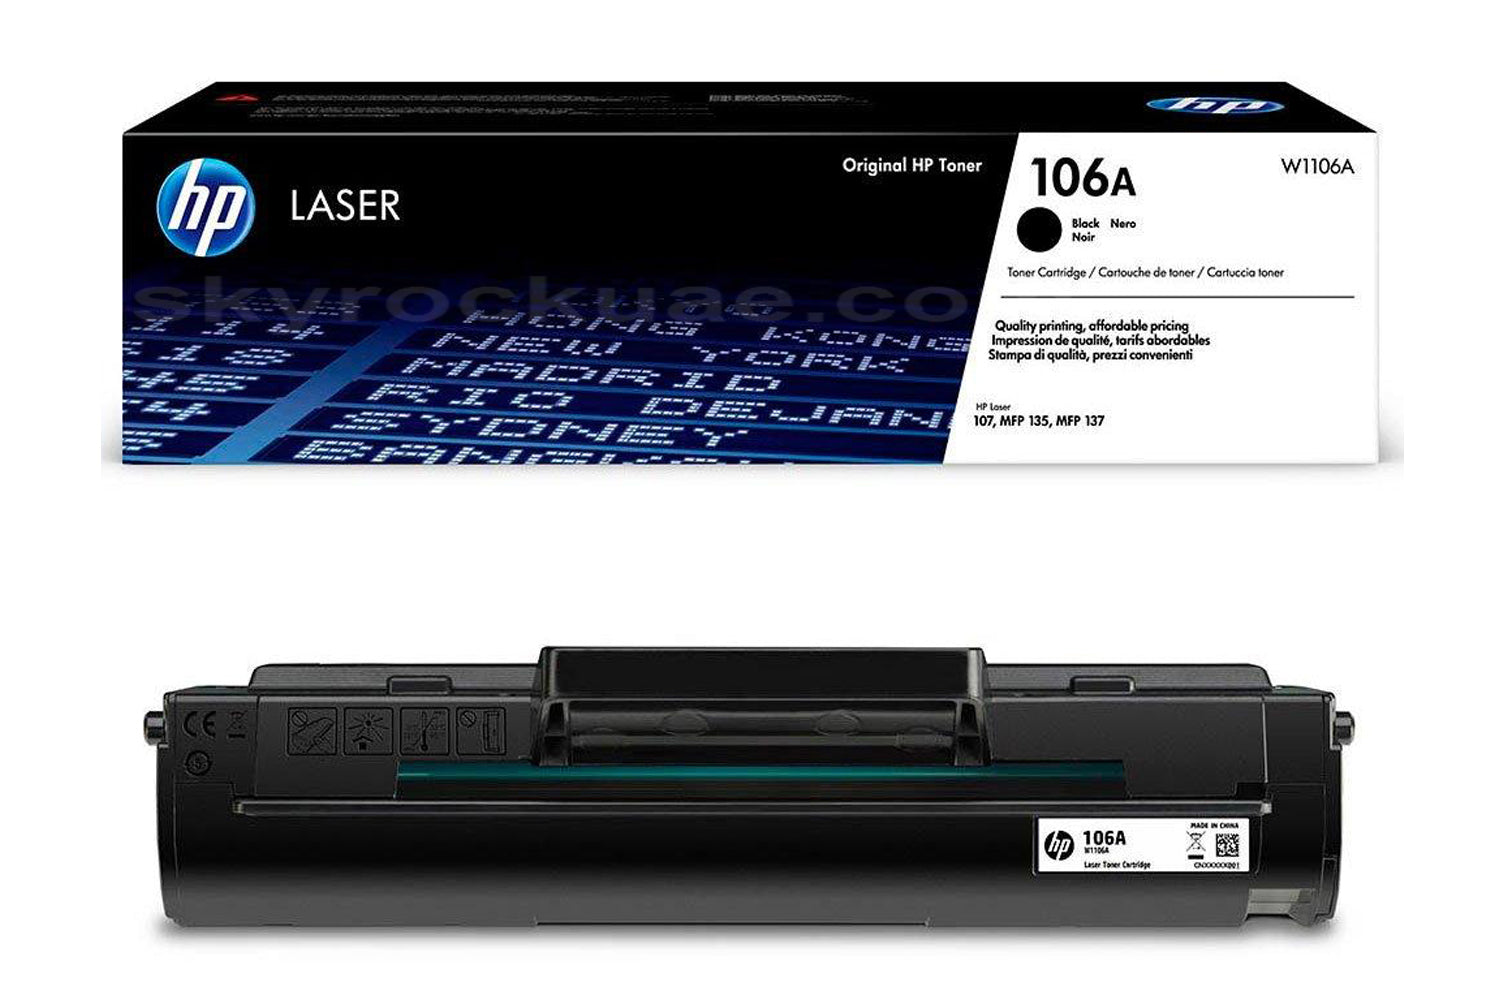 106A Toner Cartridge W1106A for HP Laser 107 MFP135 MFP137